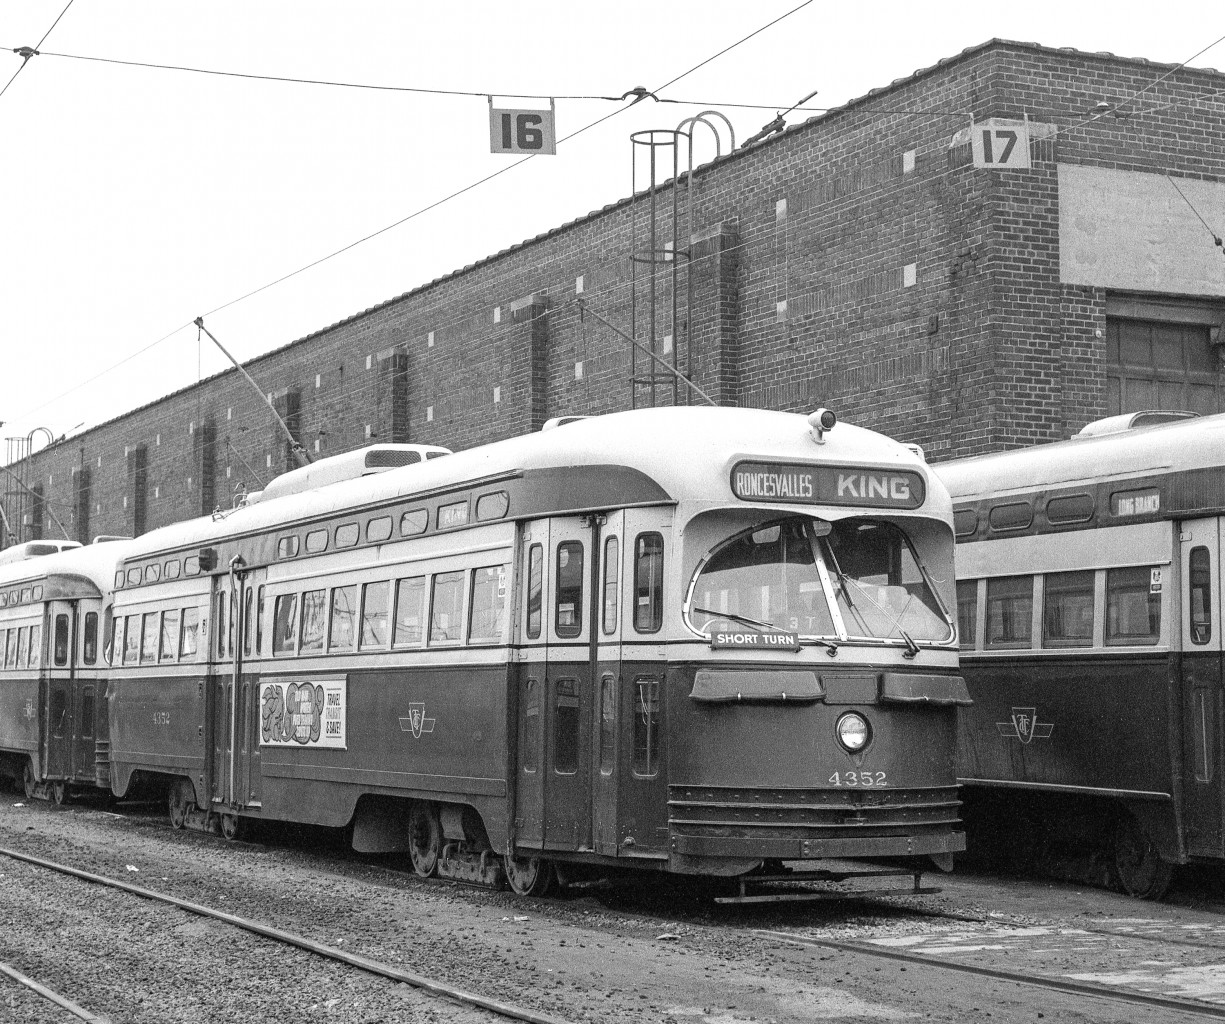 It is the late 1960's/early 1970's (Possibly 09/13/1969) in Toronto where TTC 4352 sits outside the Roncesvalles car house.